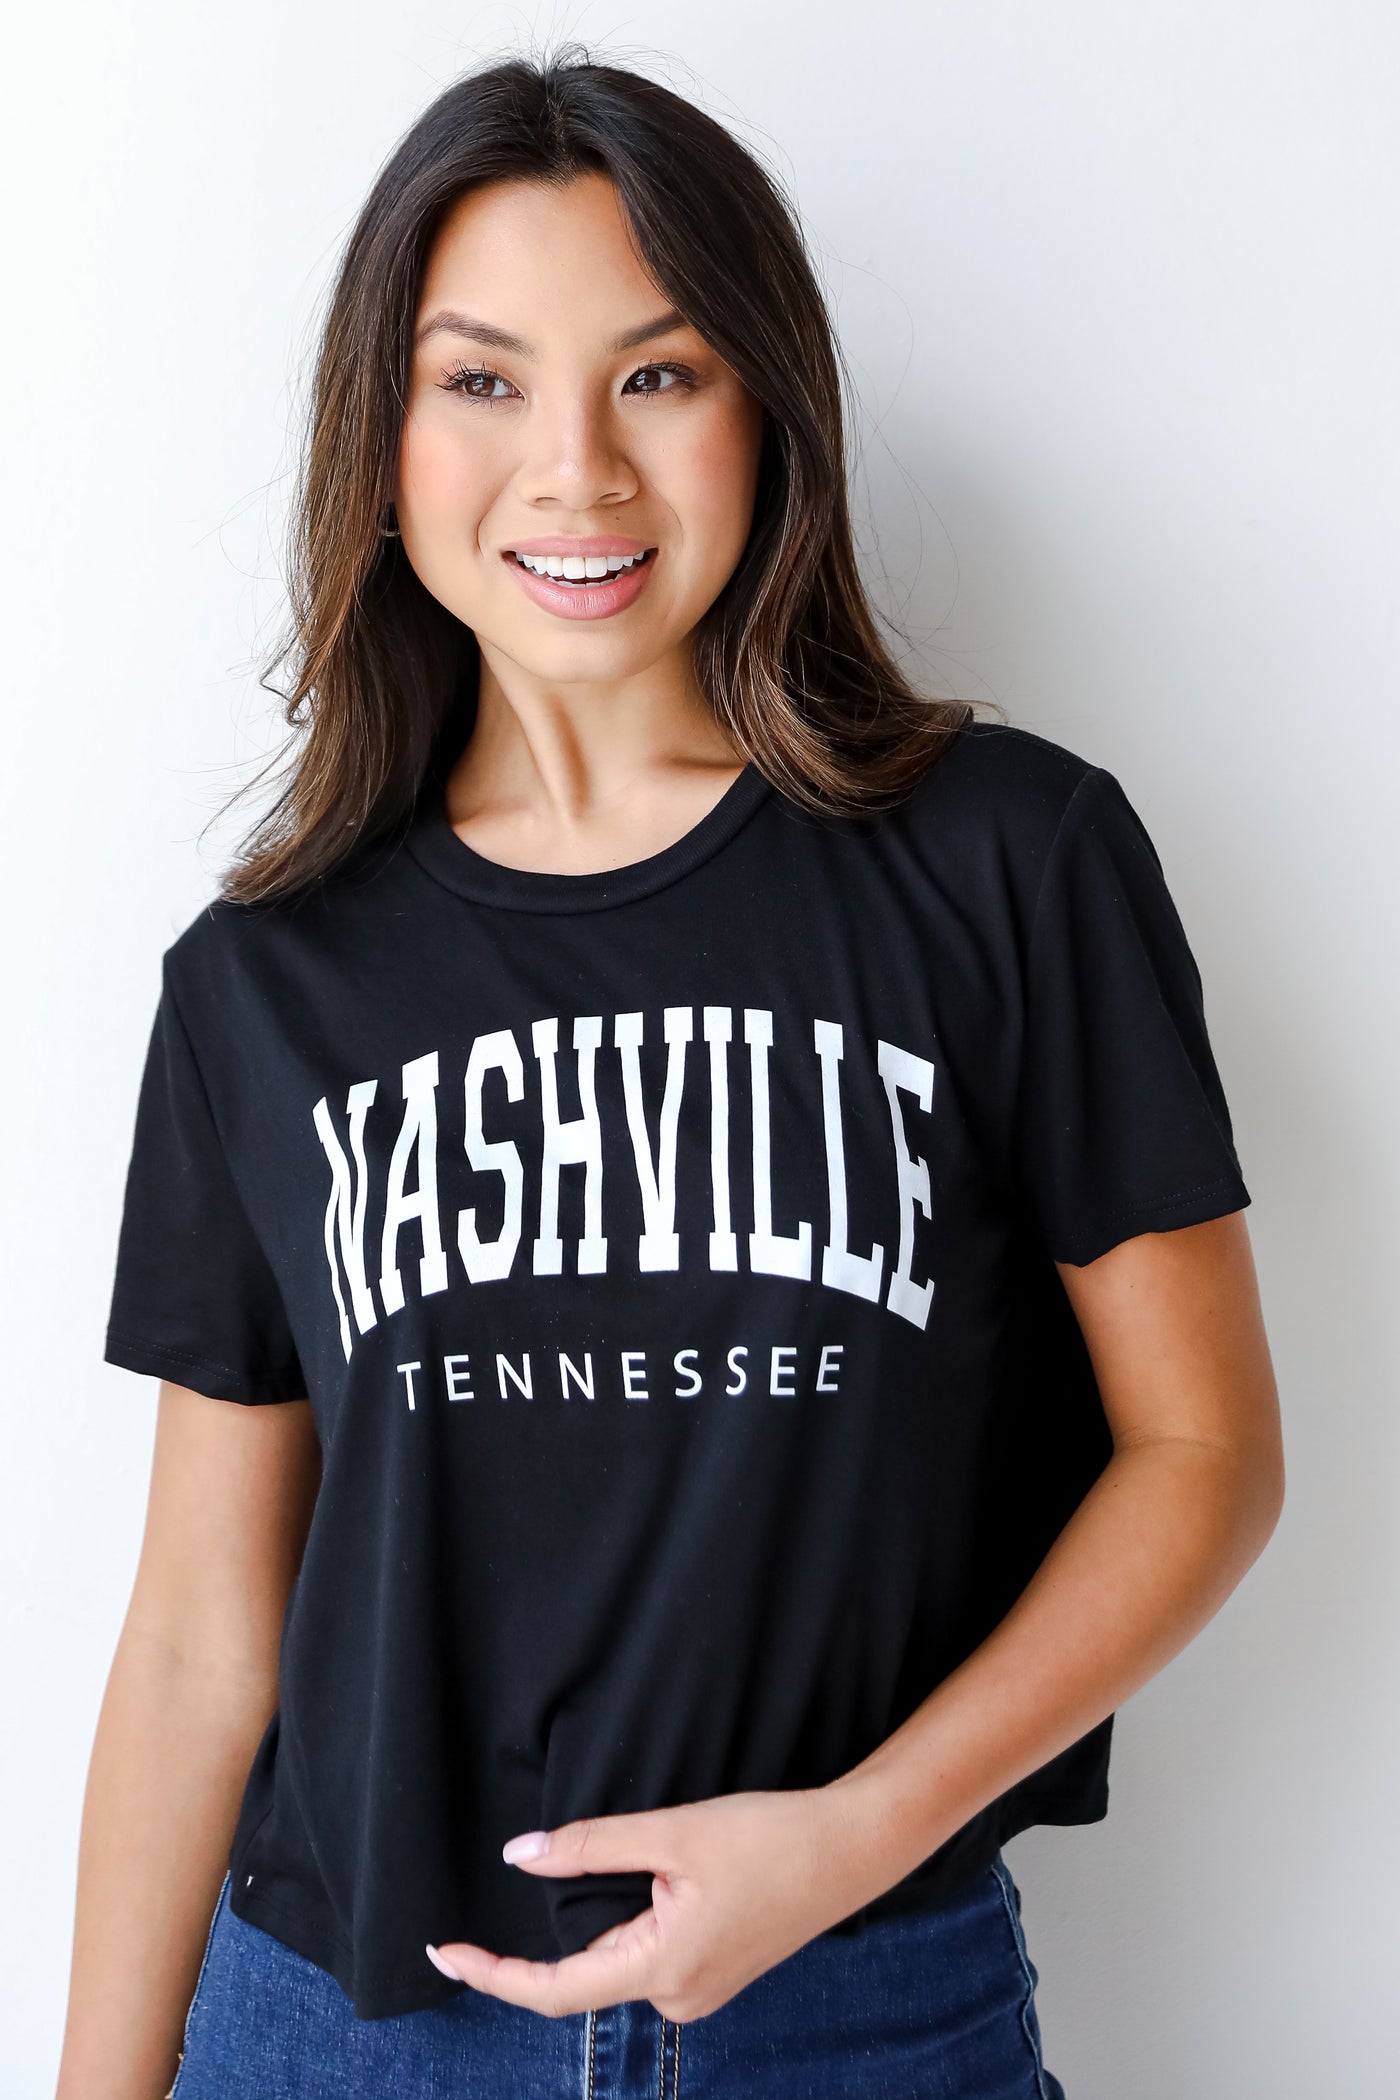 Nashville Tennessee Cropped Tee